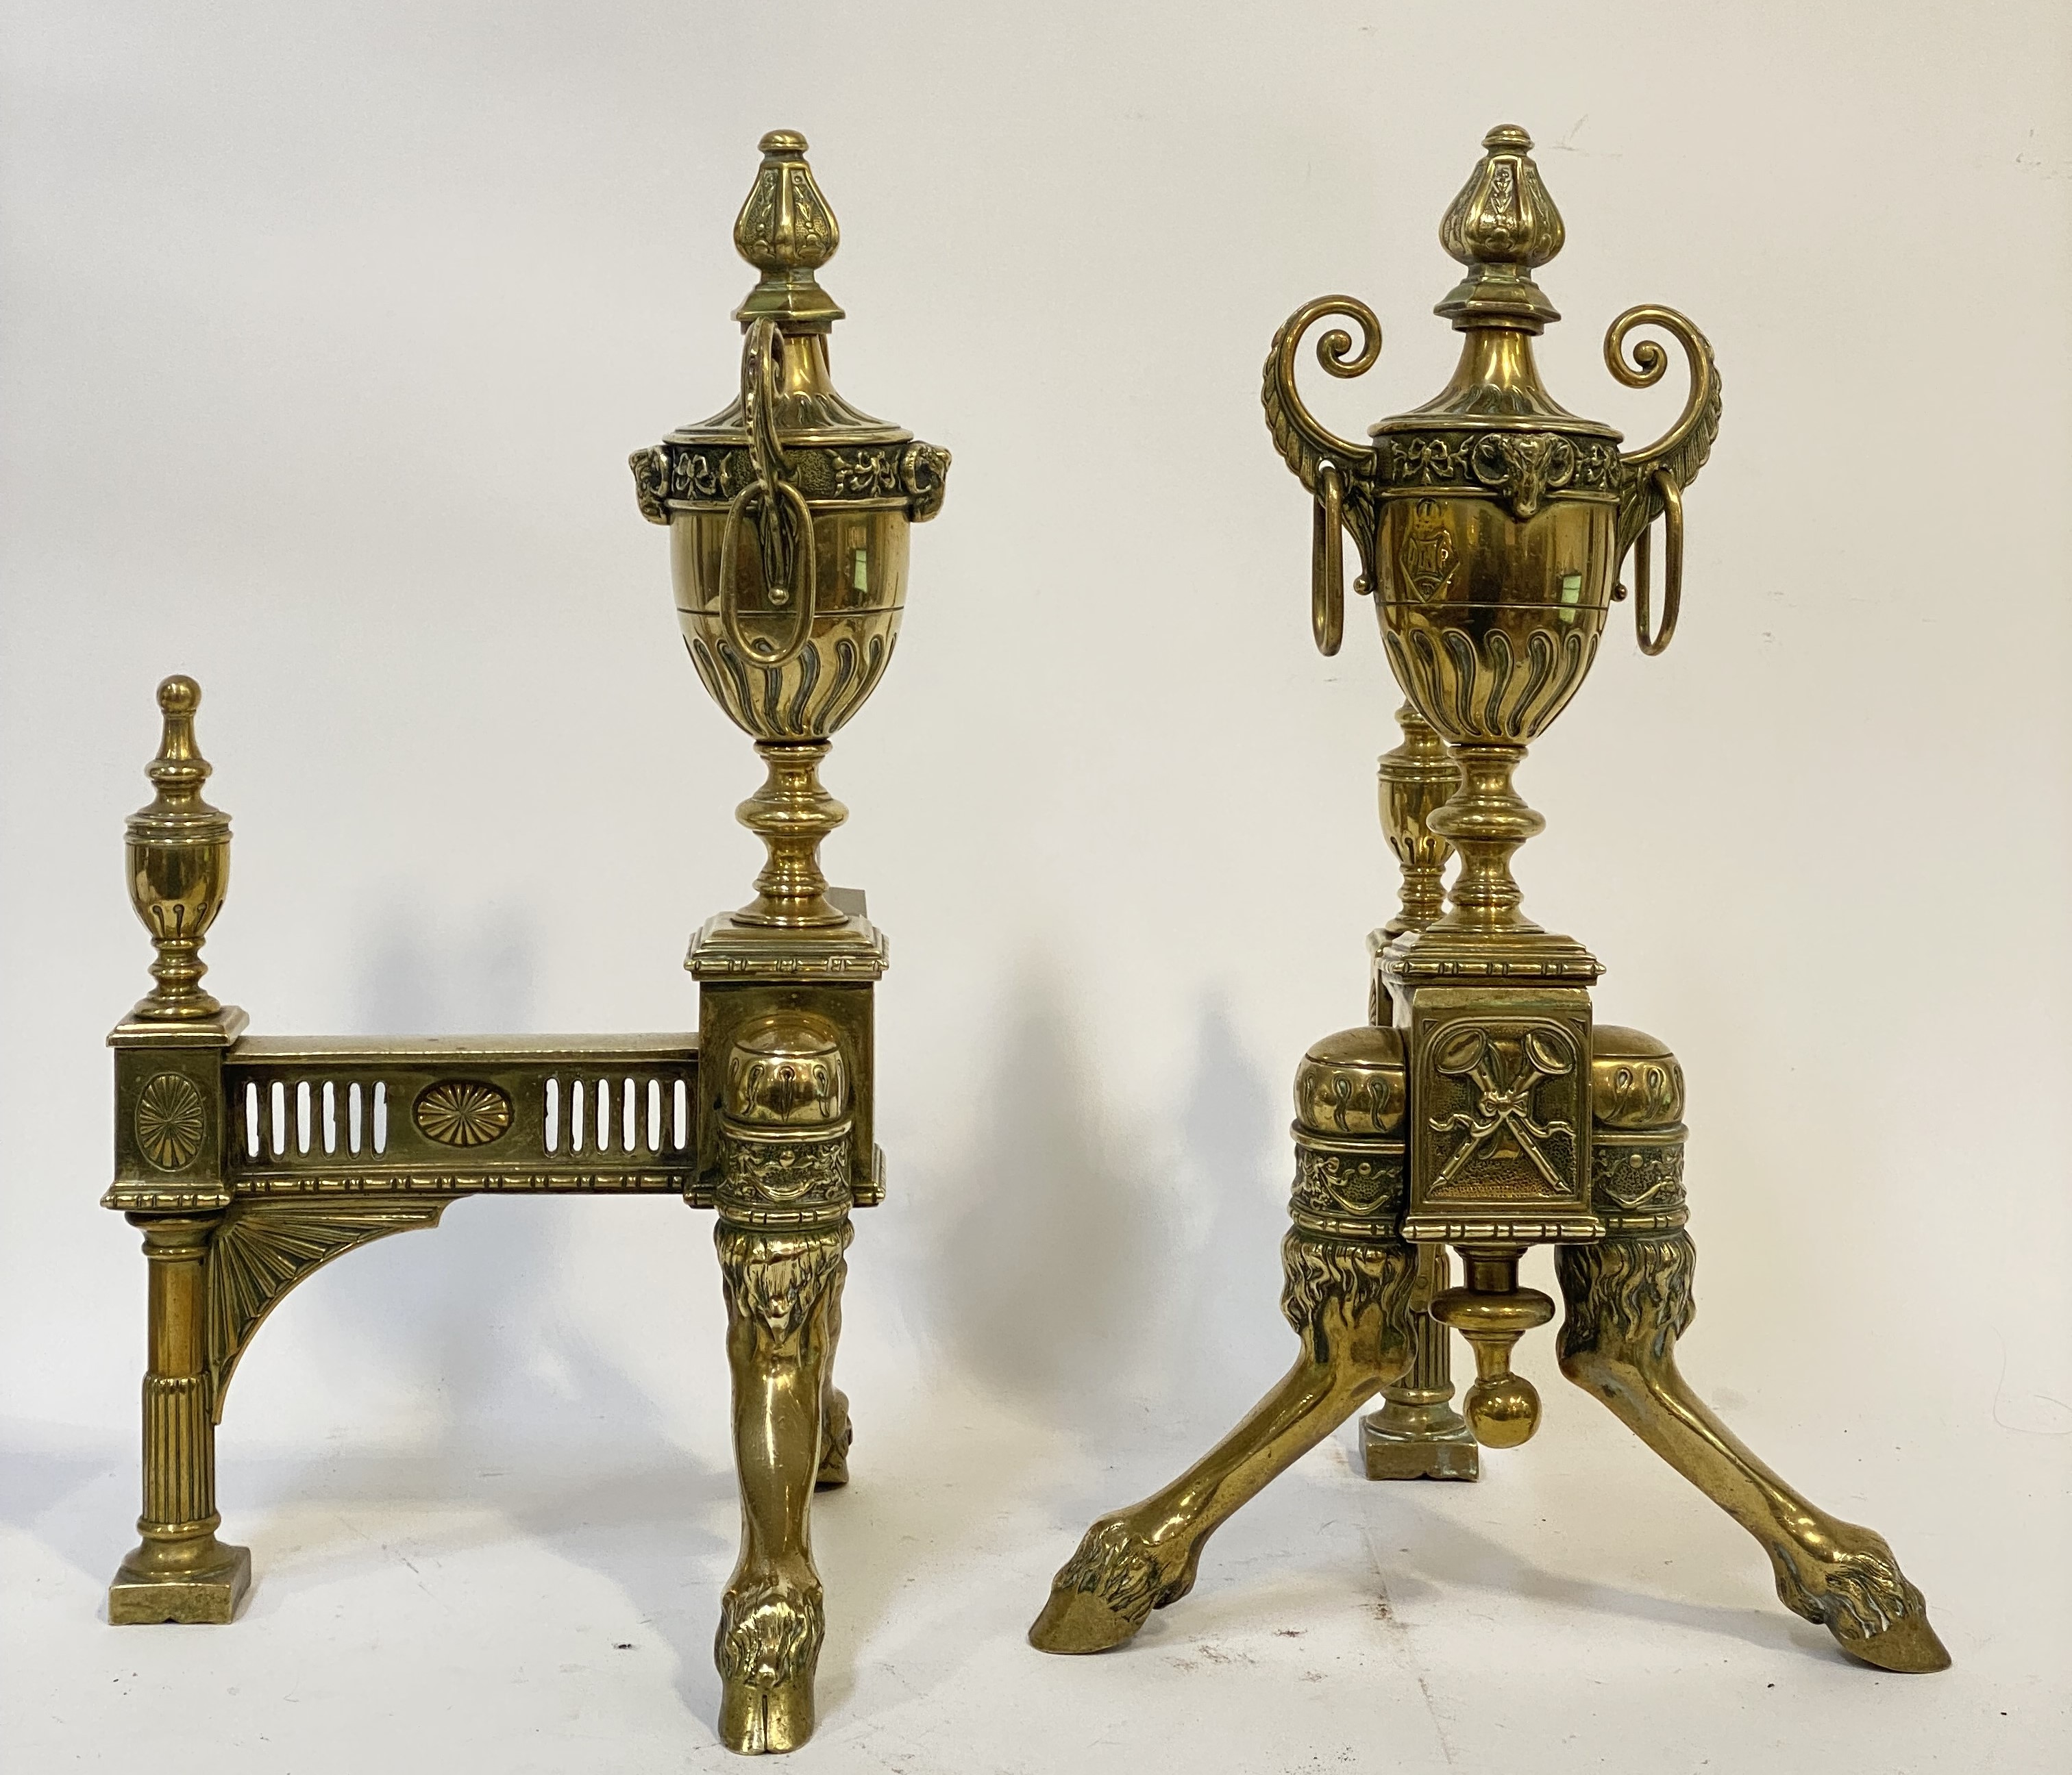 An ornate pair of cast brass fire place and-irons in the Neoclassical style, circa 1900, each with a